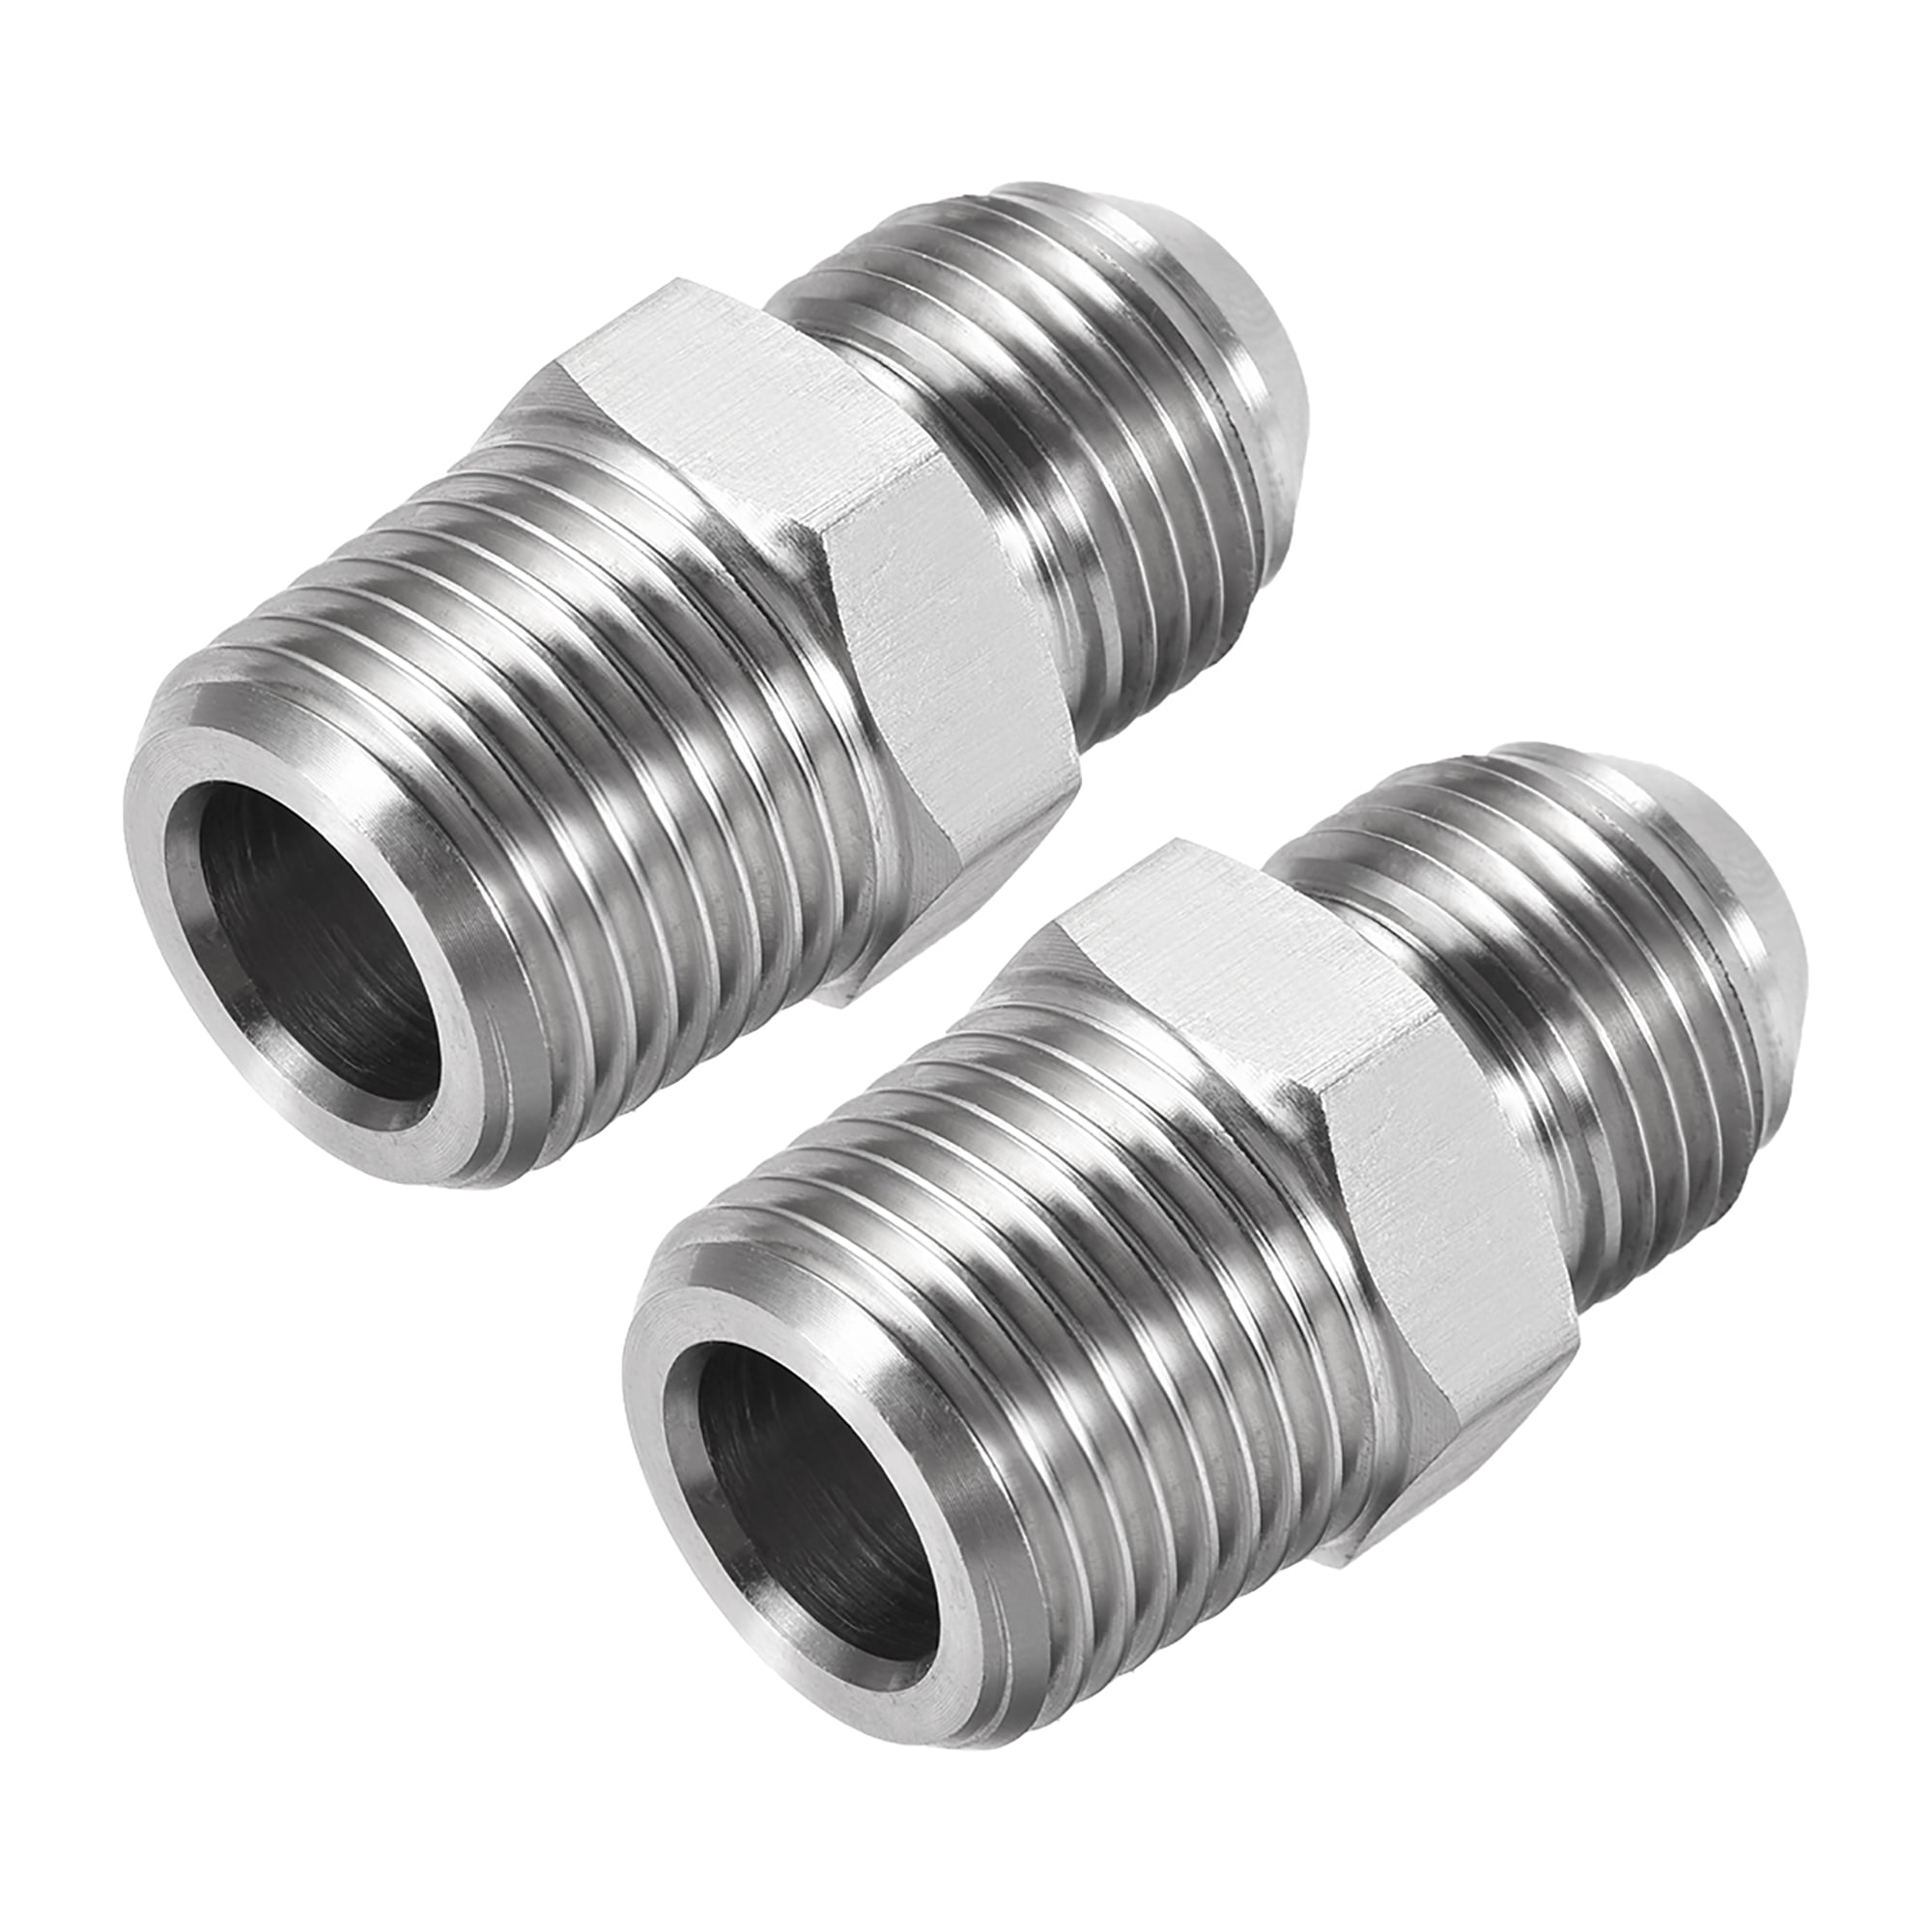 1/4"Male x 1/4" Male Threaded Pipe Fitting Stainless Steel SS304 NPT 、Pop 